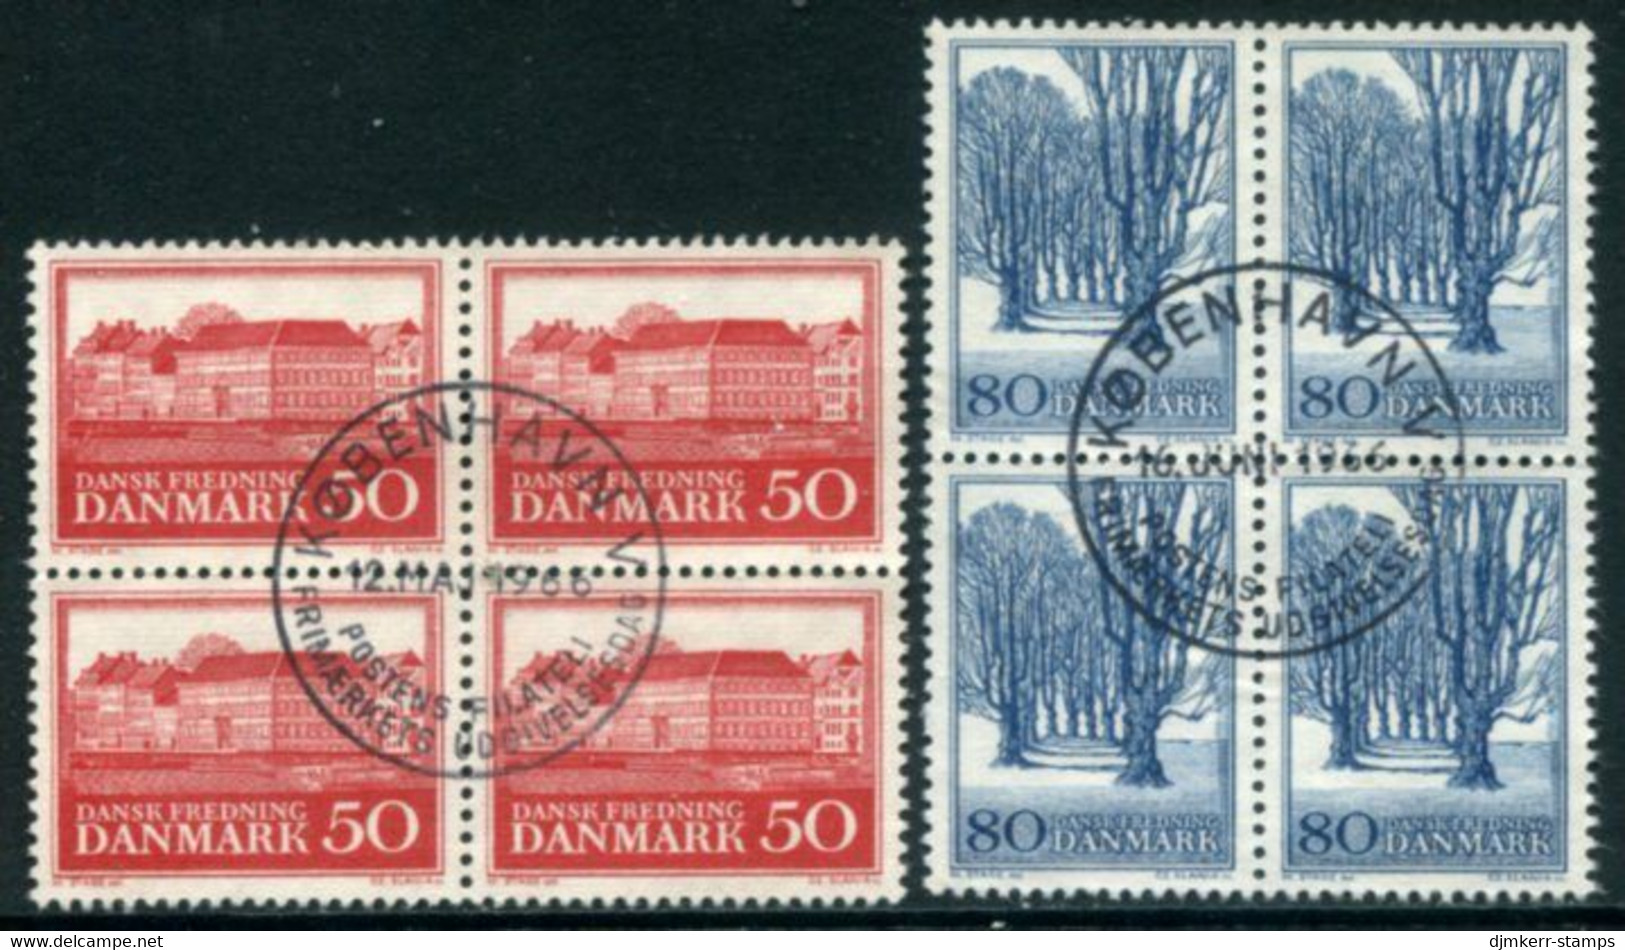 DENMARK 1966 Nature And Monument Protection Blocks Of 4 Used   Michel 442-43x - Usado